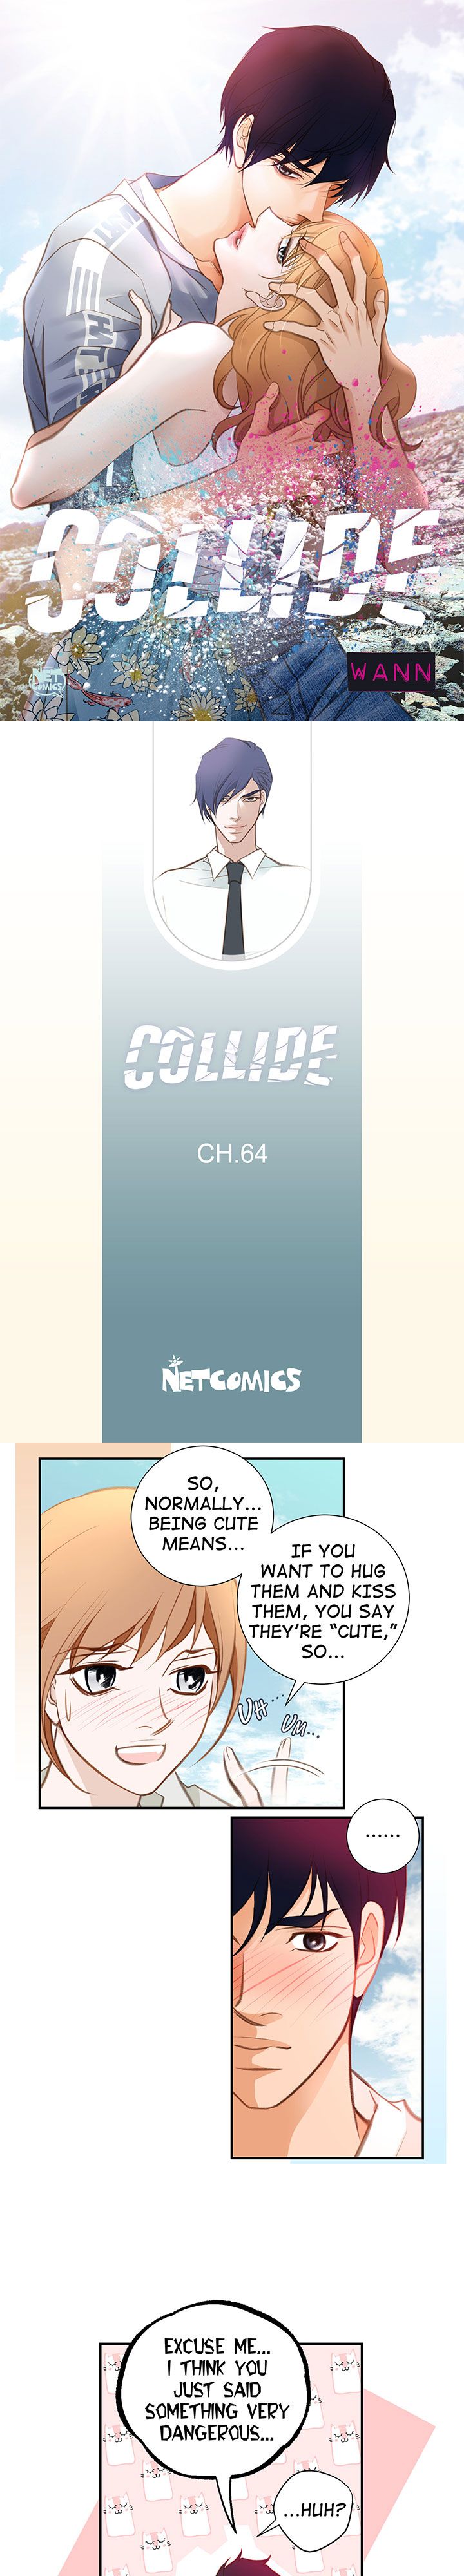 Collide - Page 1